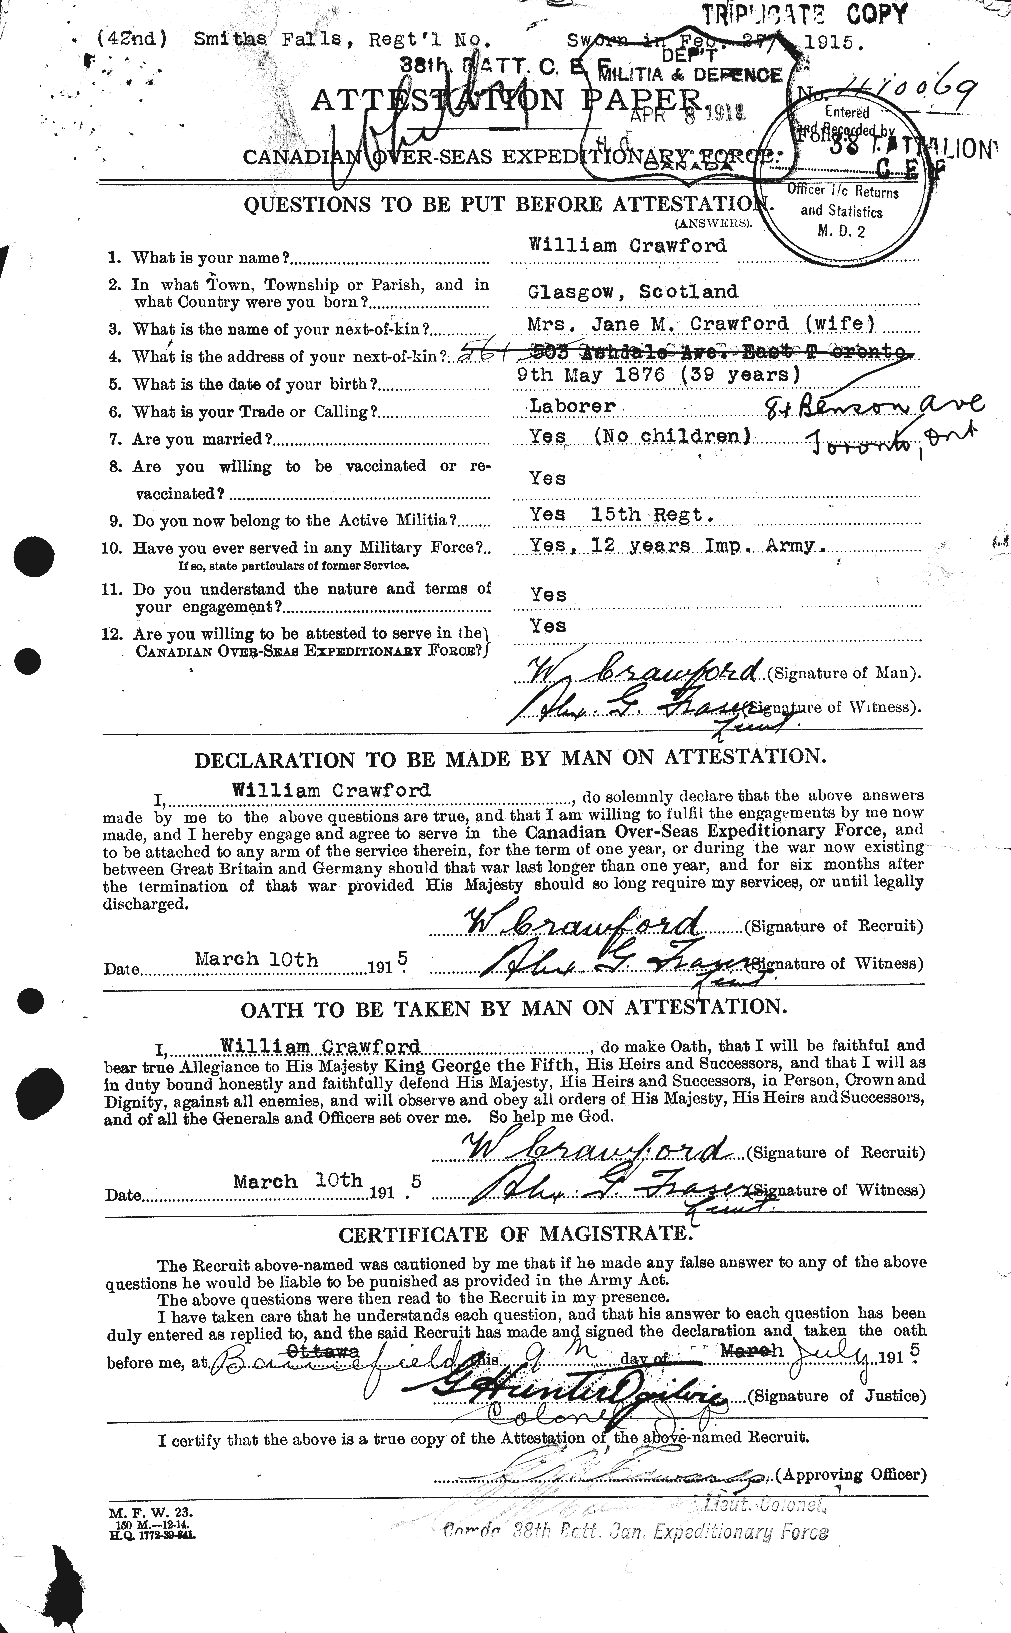 Personnel Records of the First World War - CEF 061157a